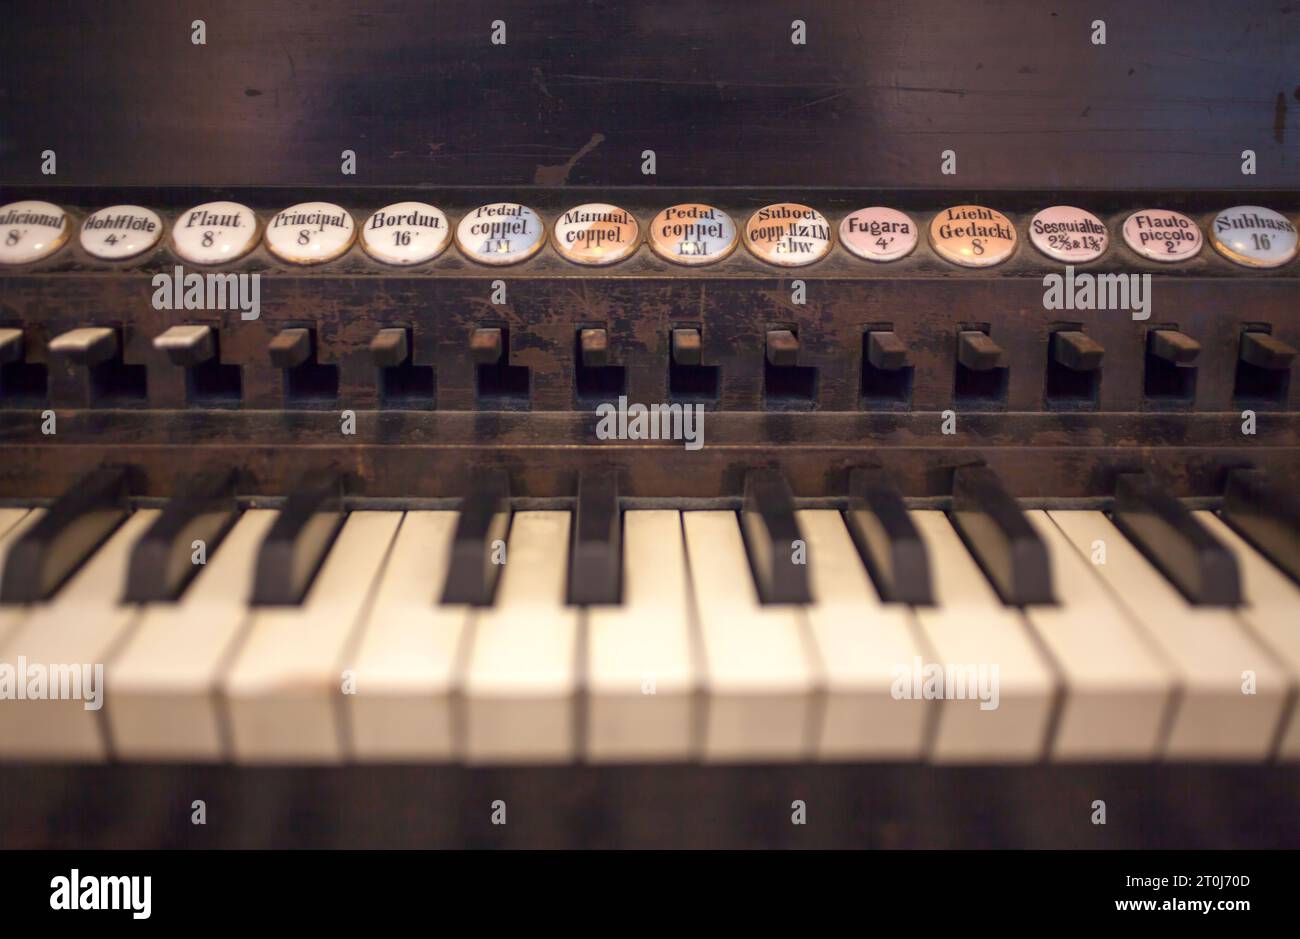 Keyboard and combination pistons of a organ, Organ Museum Borgentreich, Höxter district, North Rhine-Westphalia, Germany, Europe Stock Photo